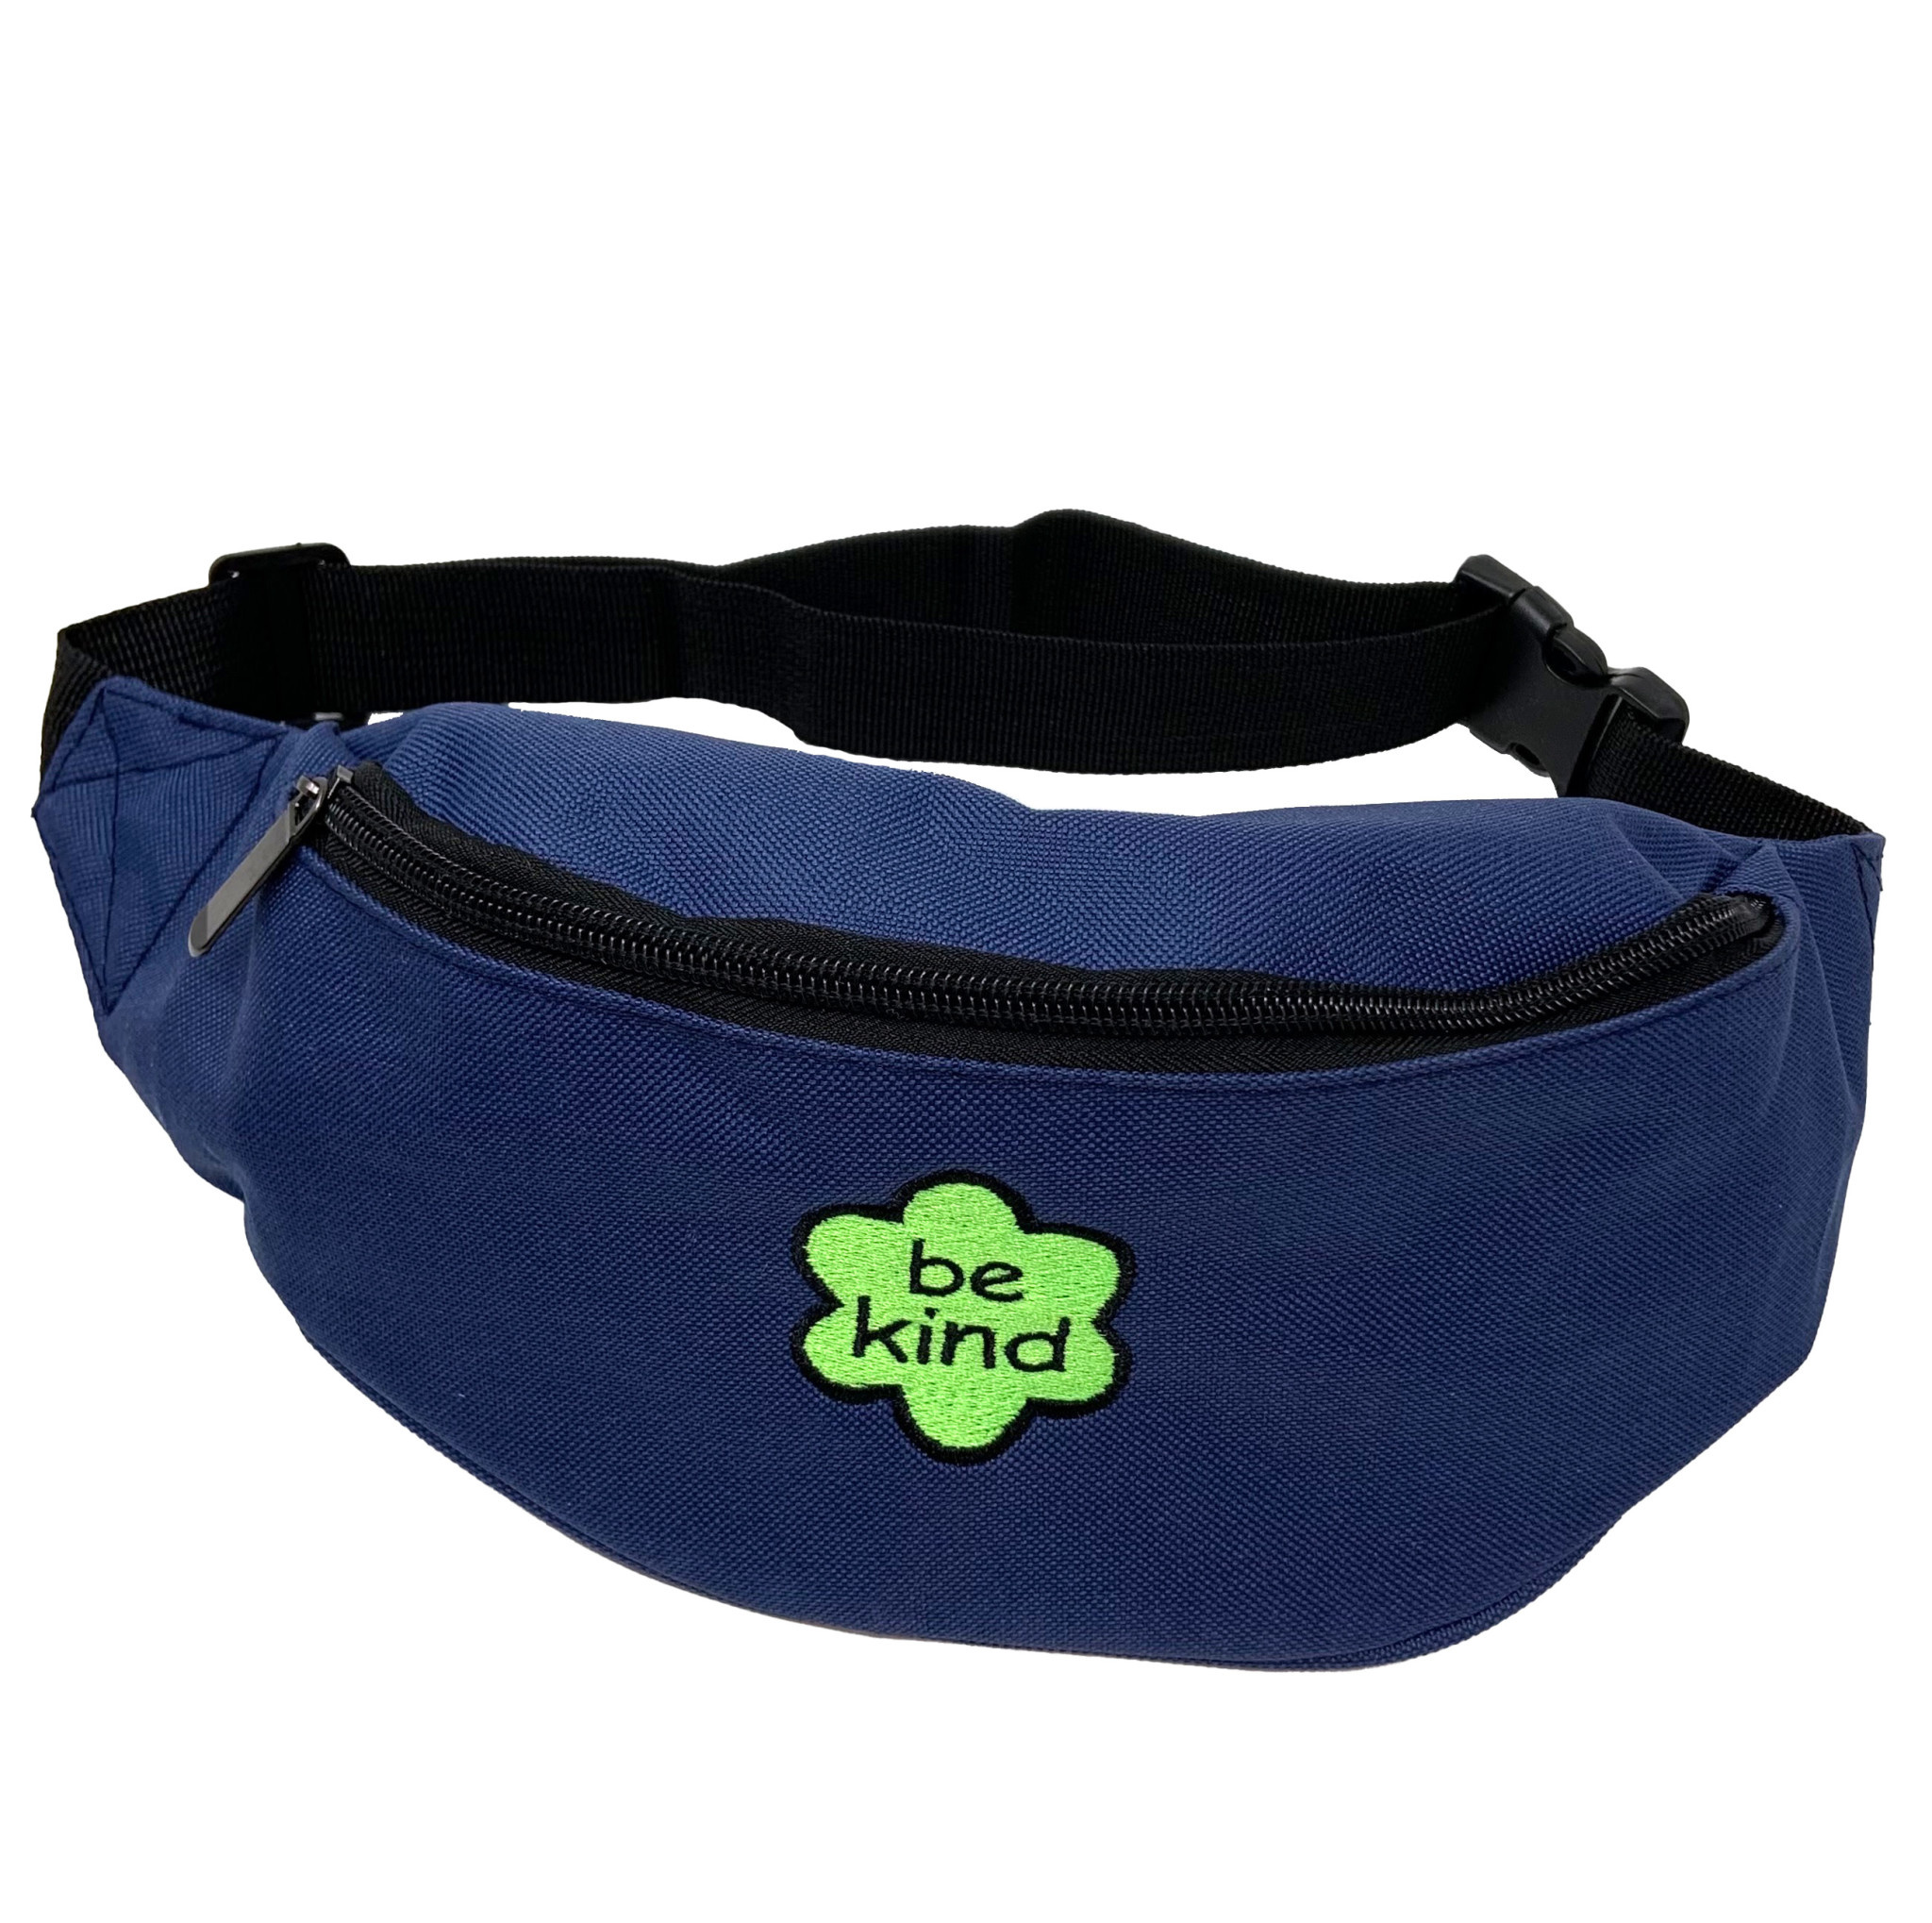 Kind Stitches Embroidered Fanny Pack